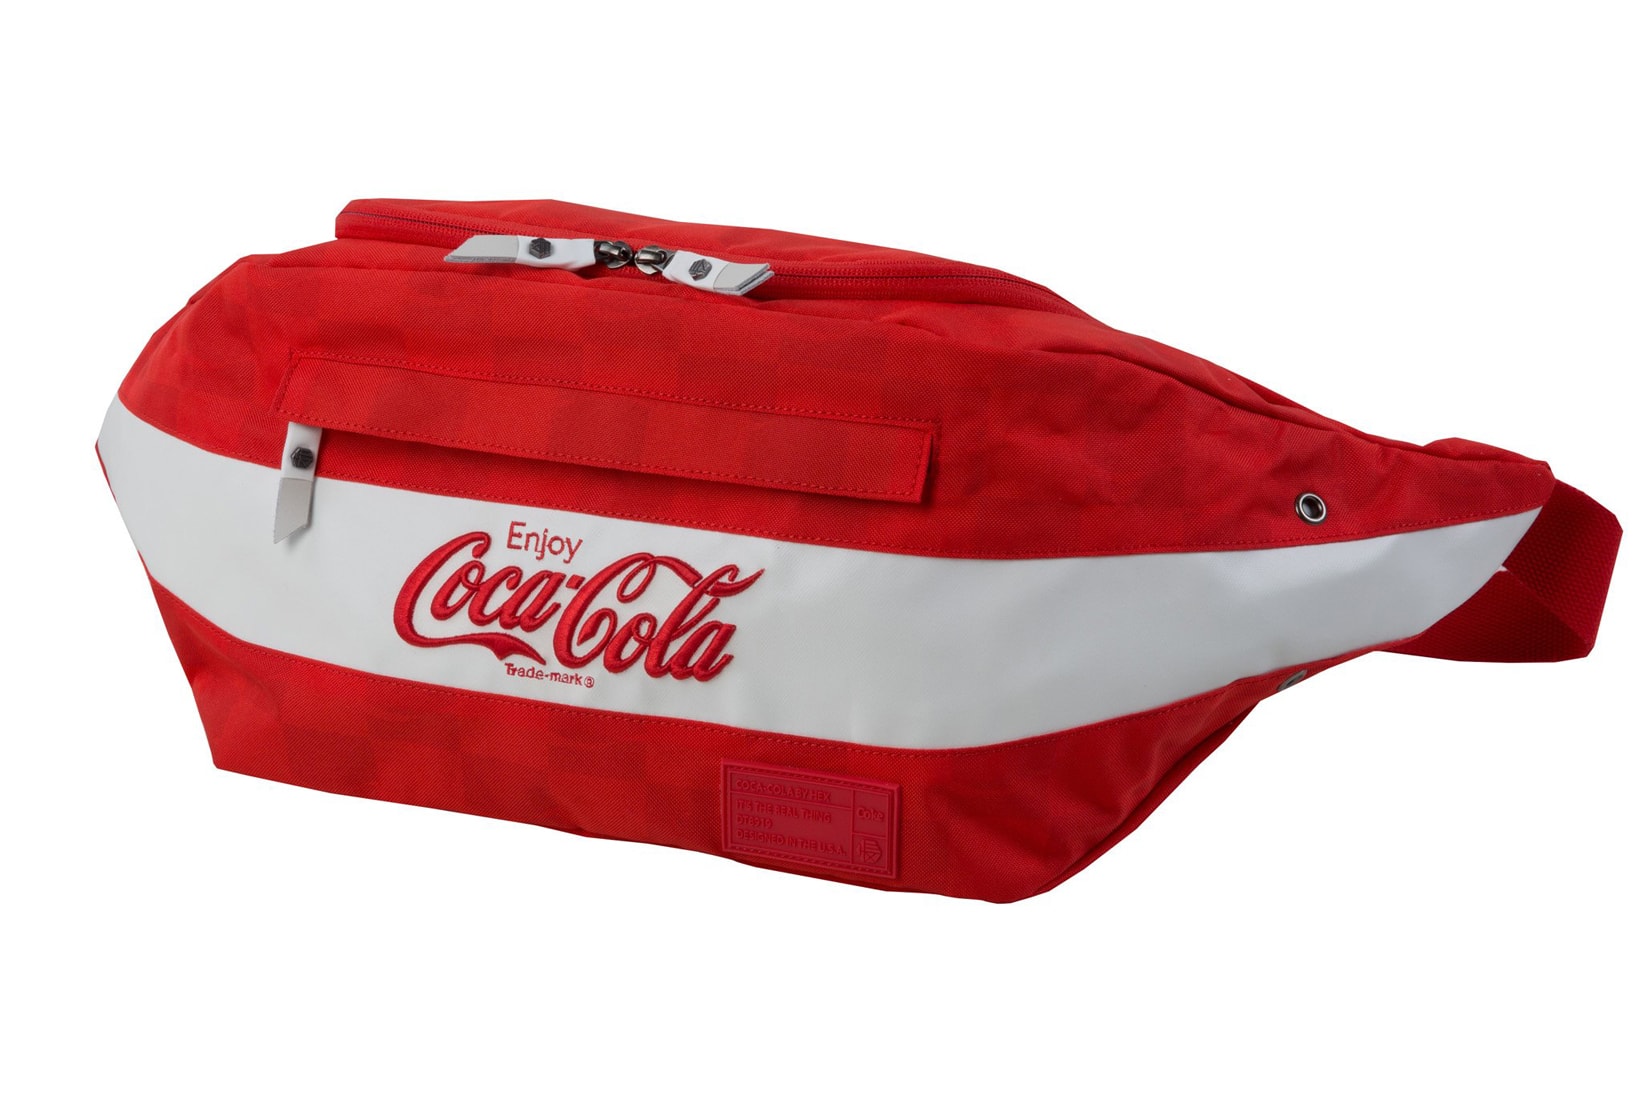 HEX & Coca-Cola Launch Sneaker Bag Collection limited edition holiday gift guide backpack duffle overnight bag fanny pack sling waist bag bum bag